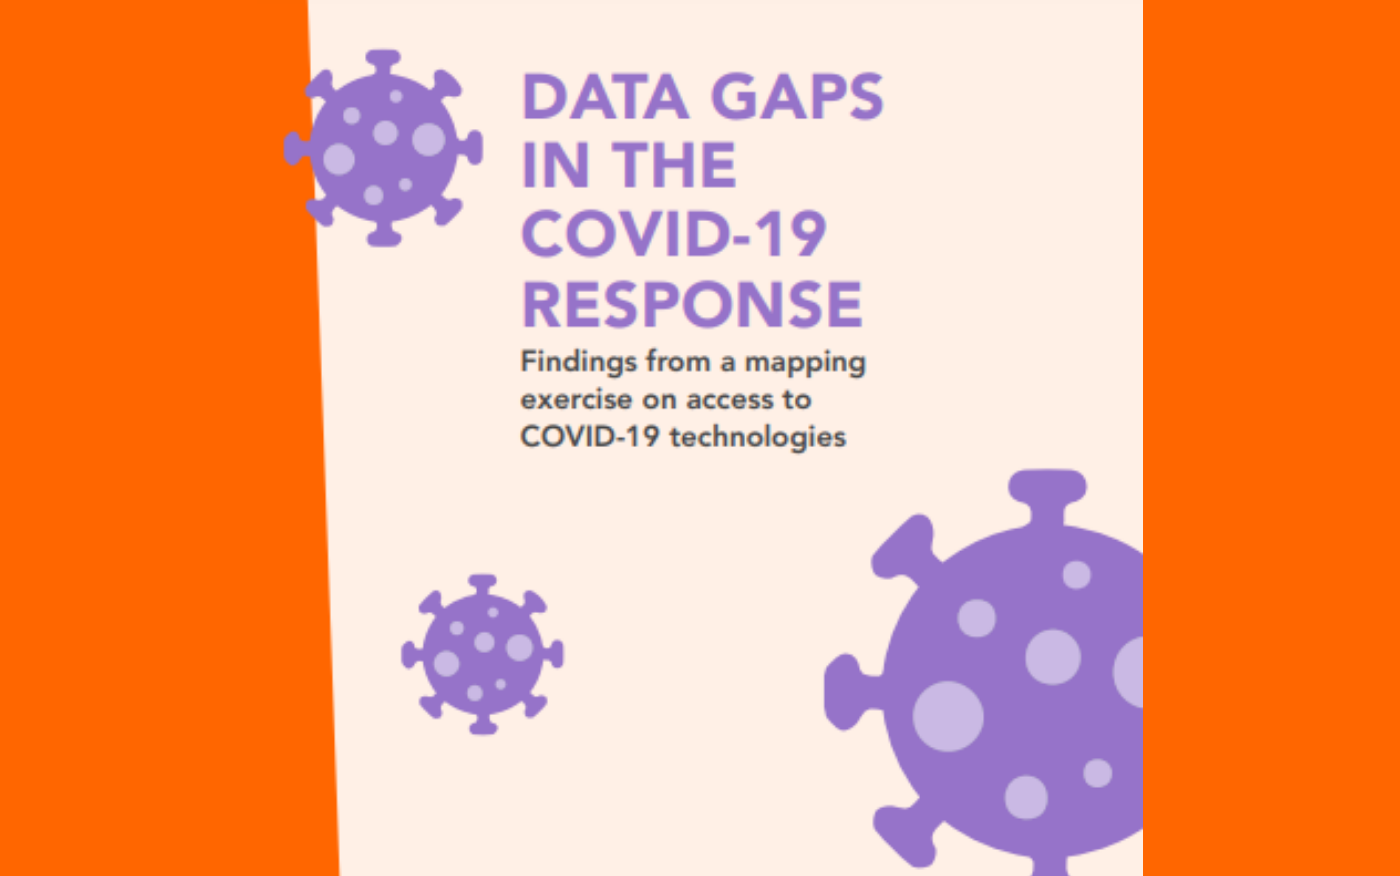 Data Gaps in the COVID-19 Response: Findings from a mapping exercise on access to COVID-19 technologies